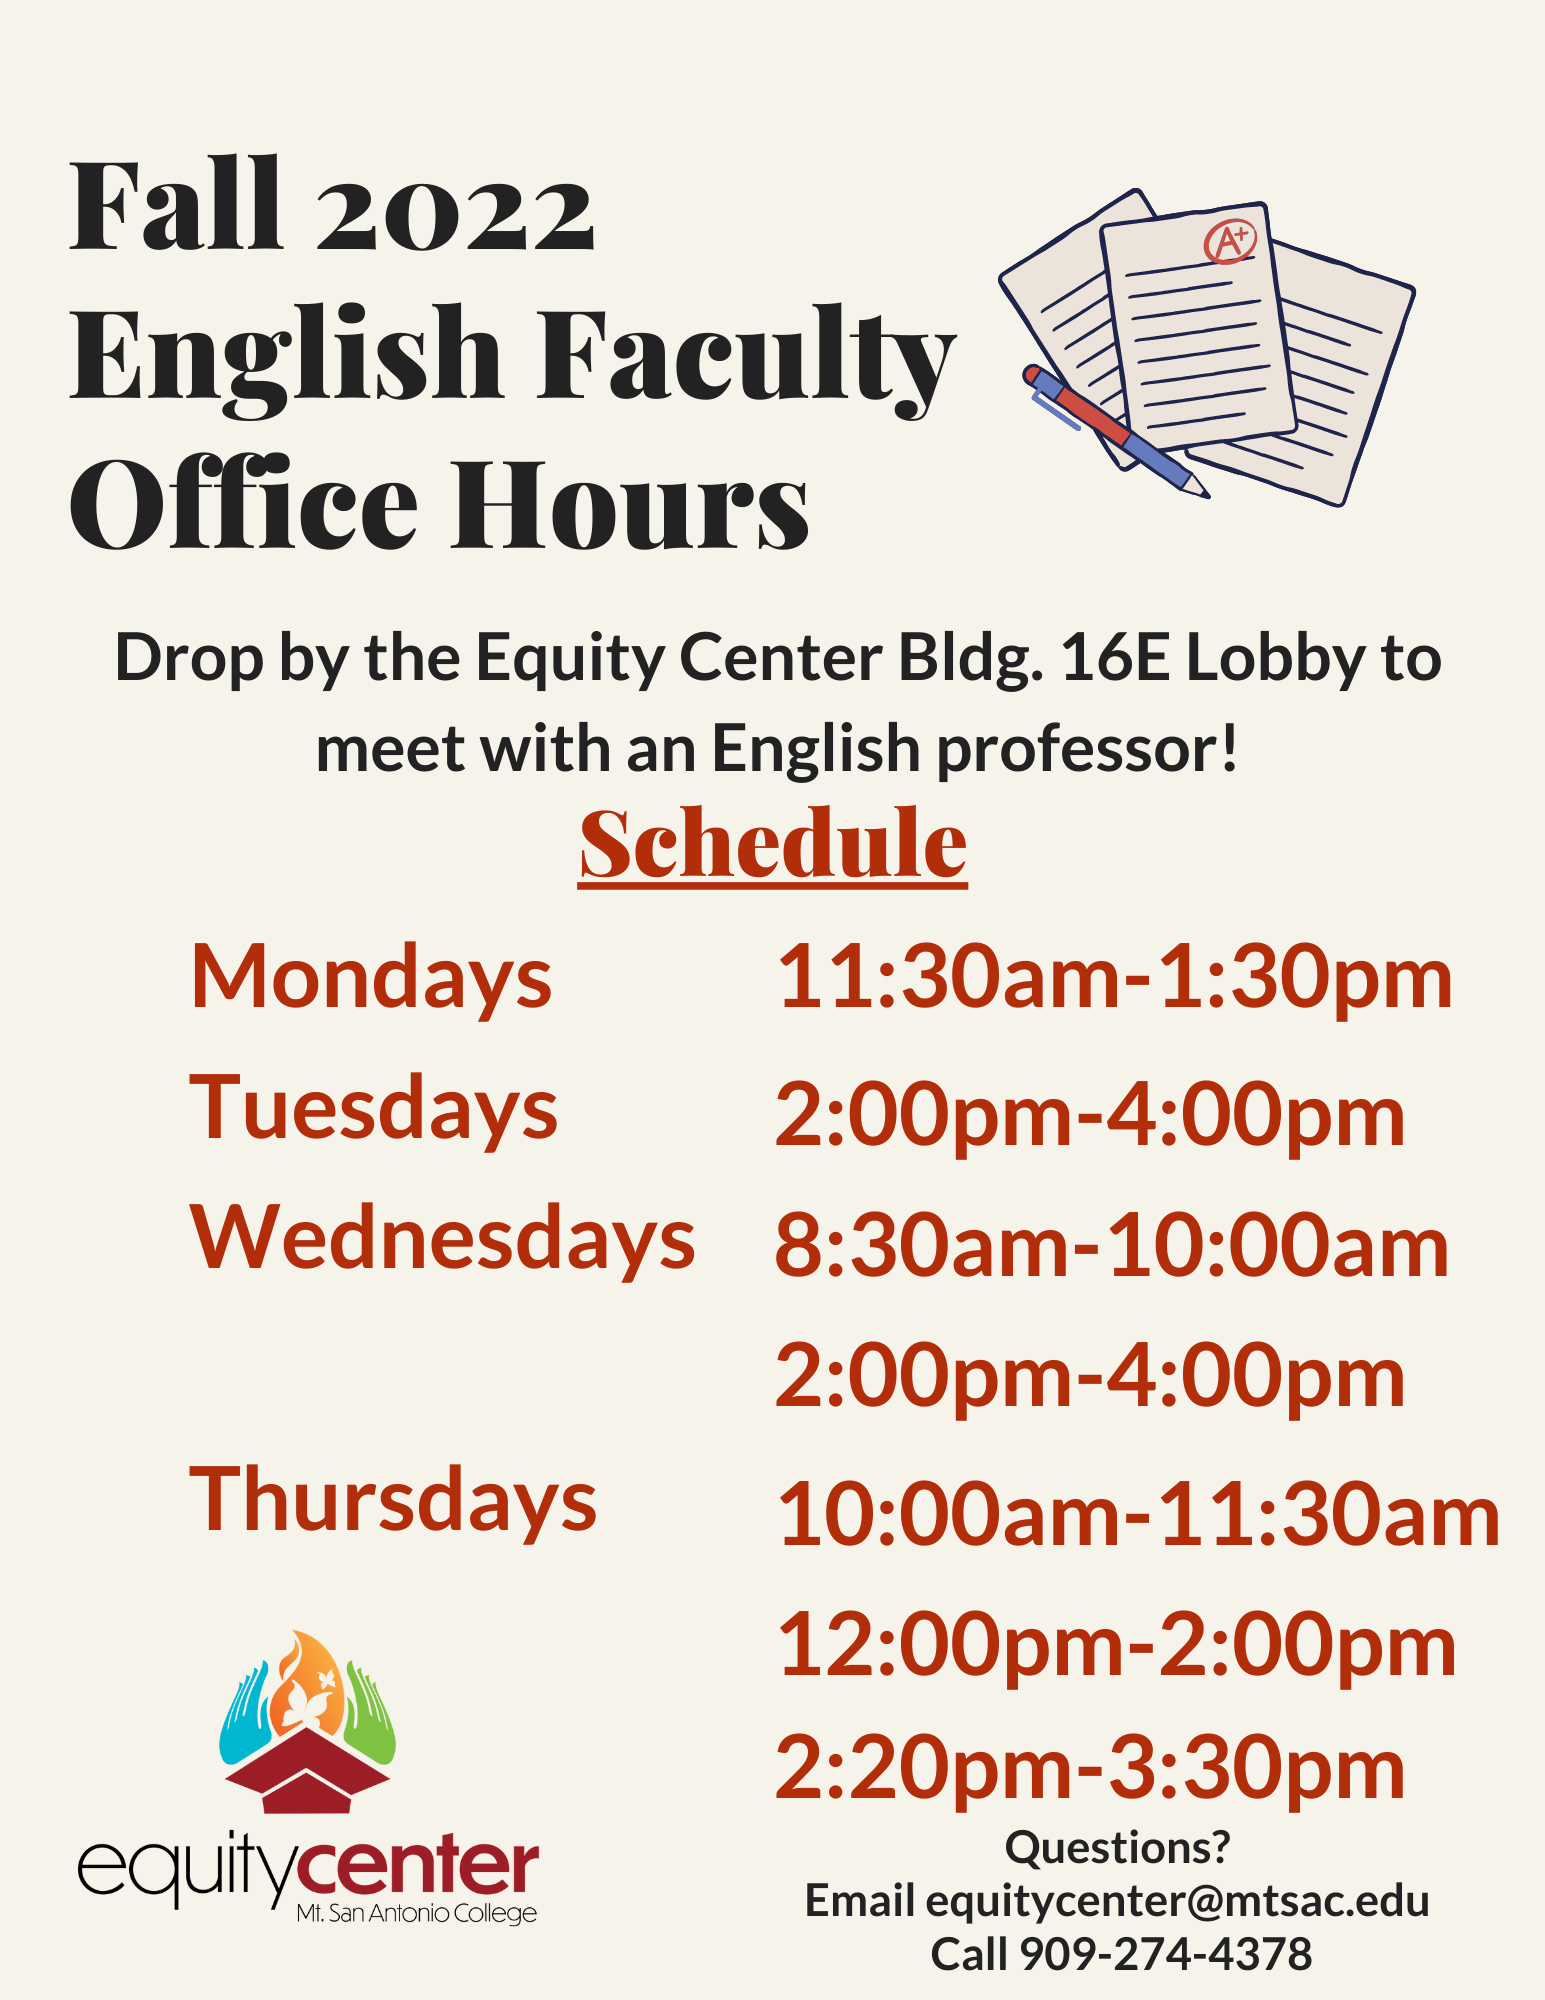 English Faculty Office Hours Schedule